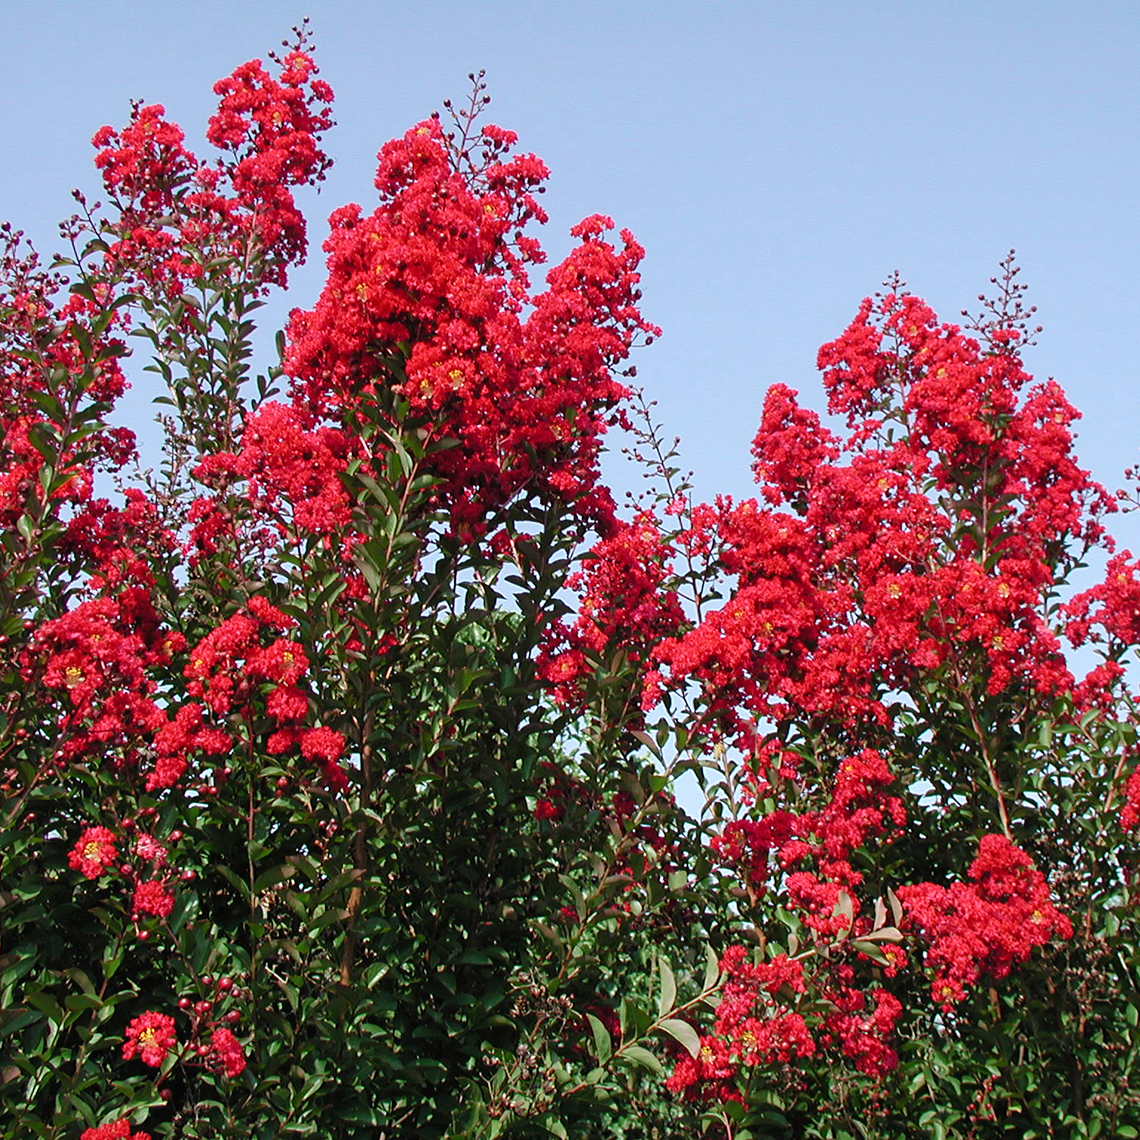 Heavy red bloom set of Red Rocket Lagerstroemia